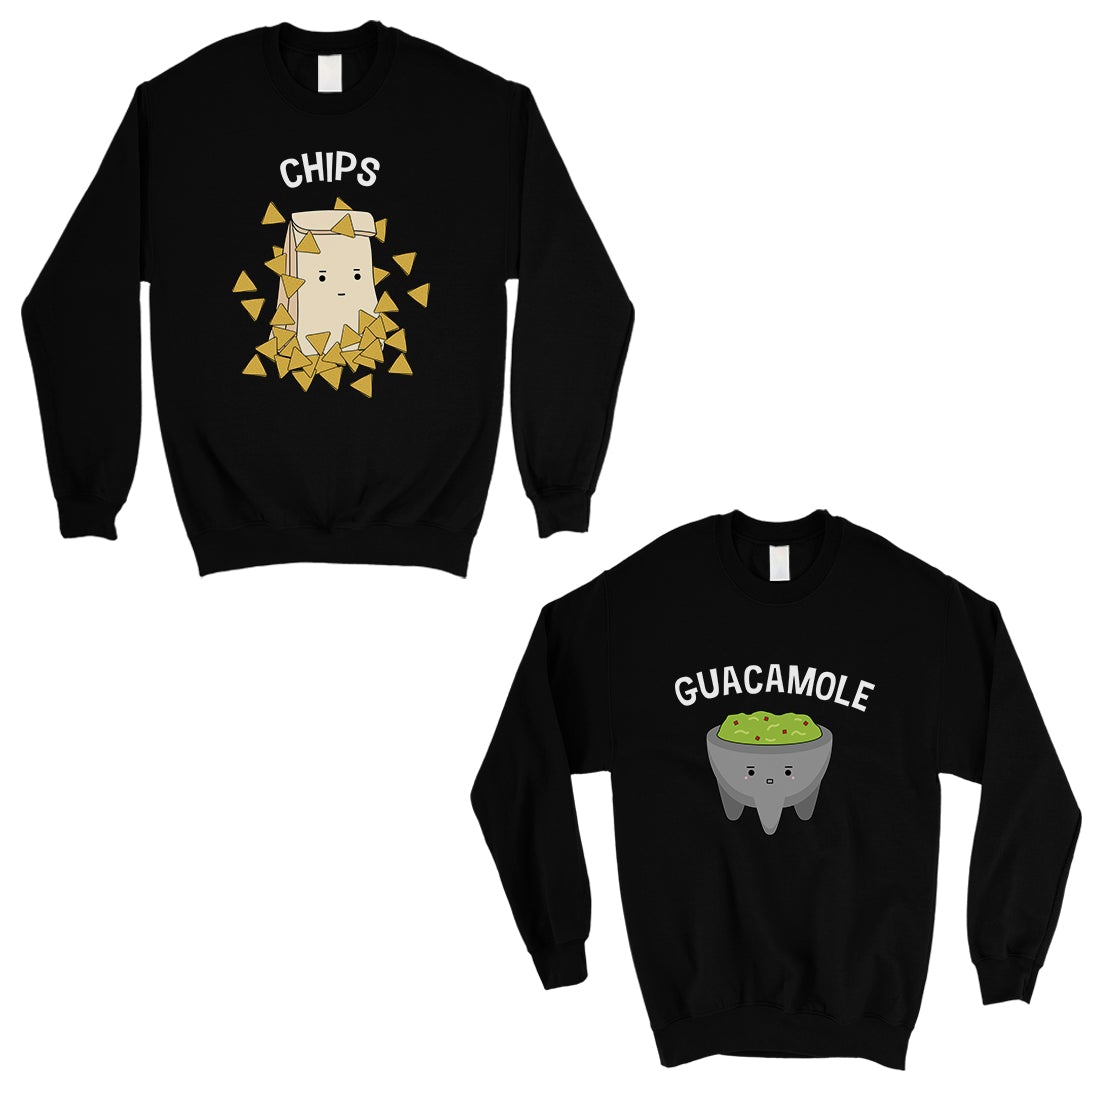 Chips & Guacamole Matching Sweatshirt Pullover Cute Couples Gift Black